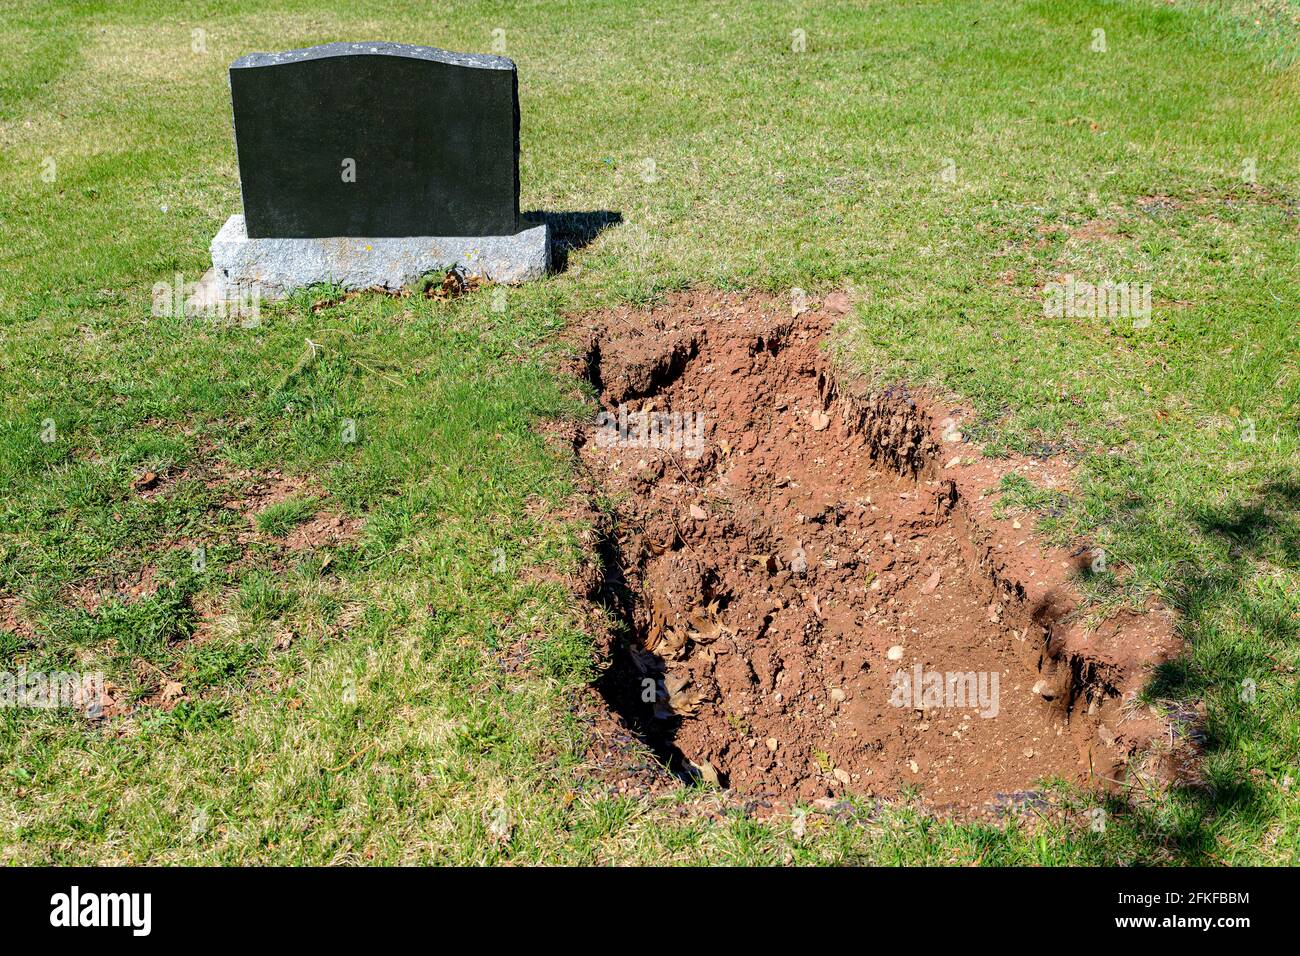 Dug Grave High Resolution Stock Photography and Images - Alamy